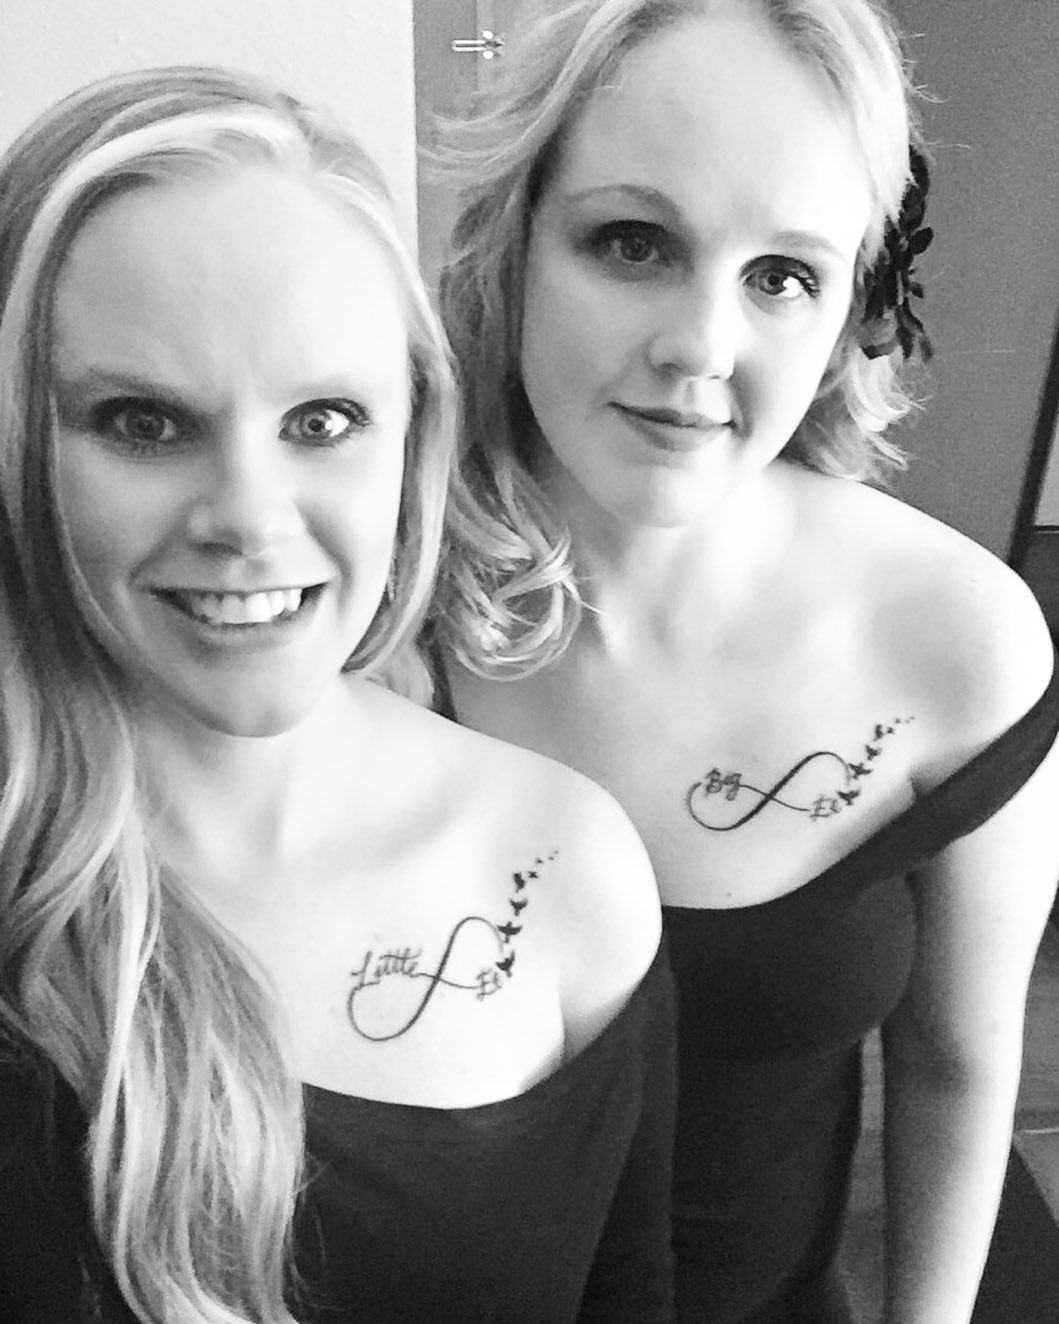 UPDATED] 40+ Matching Sister Tattoos You'll Both Love